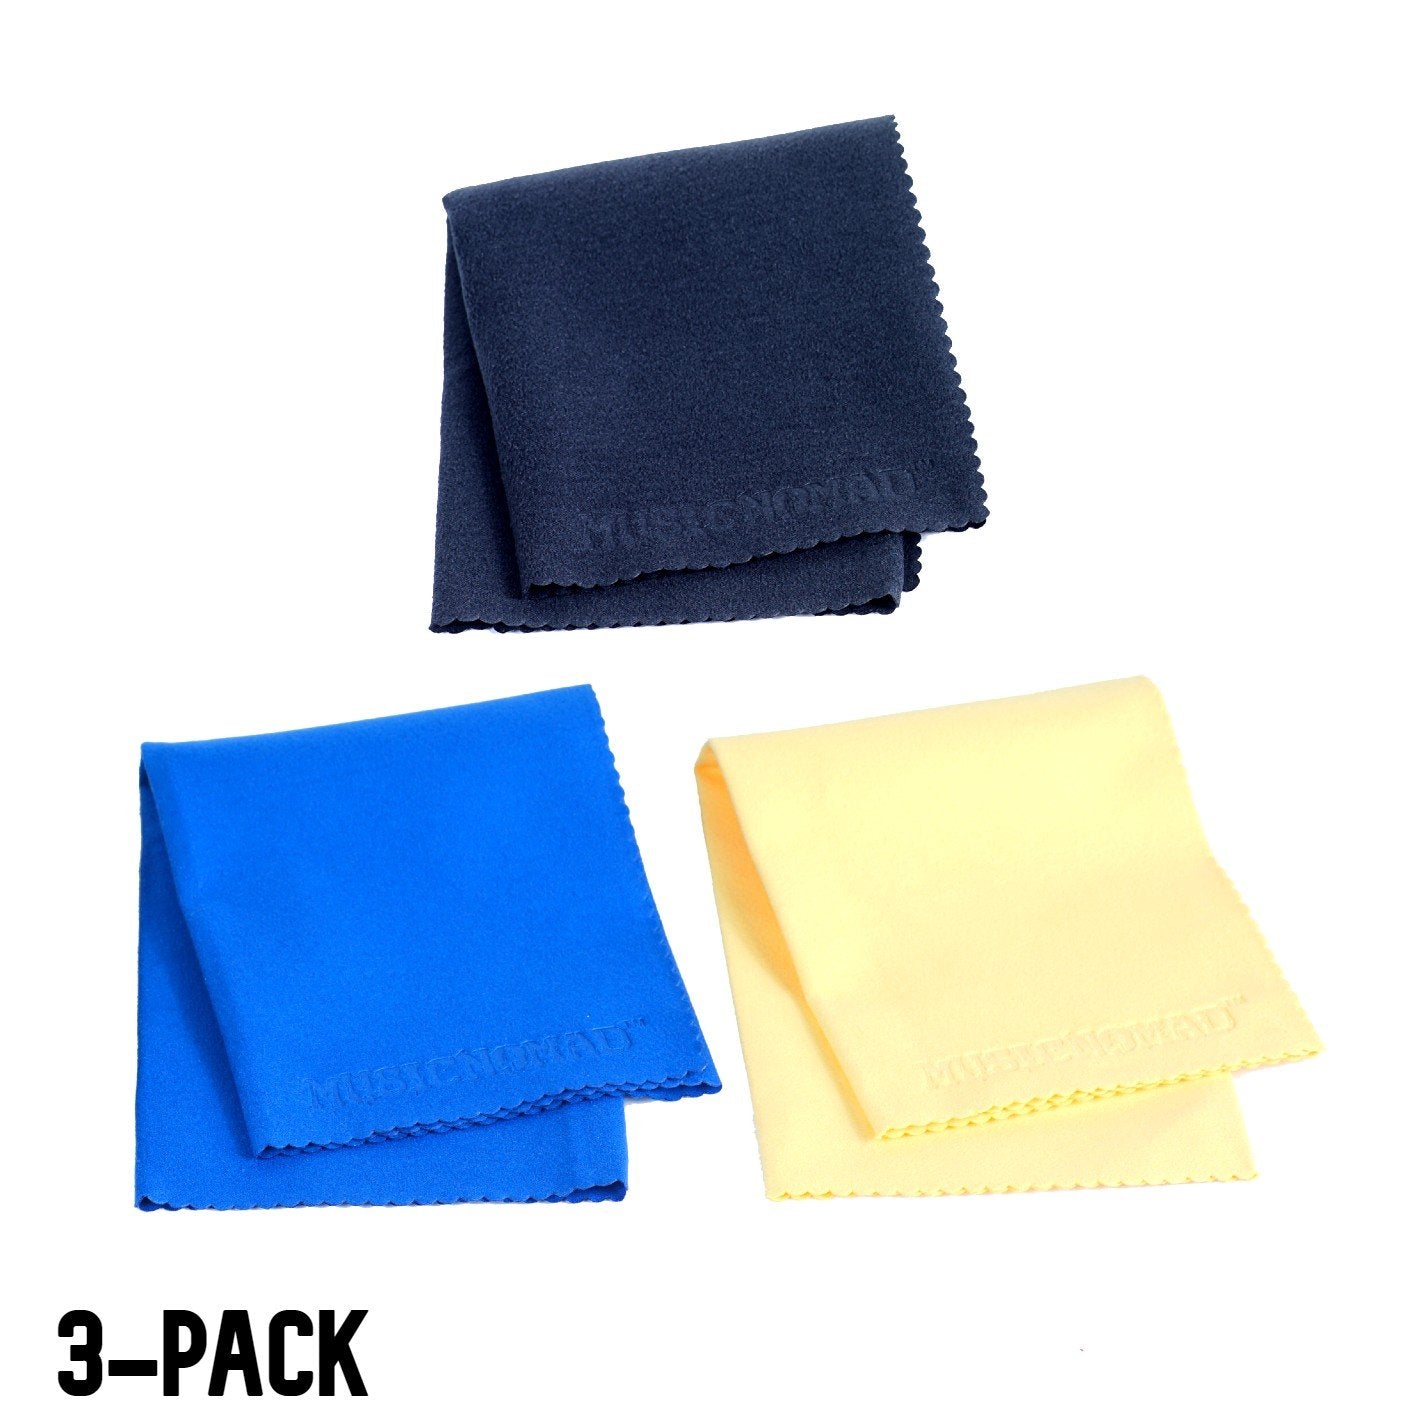 Music Nomad MN230 Microfiber Dusting & Polishing Cloth for Pianos & Keyboards